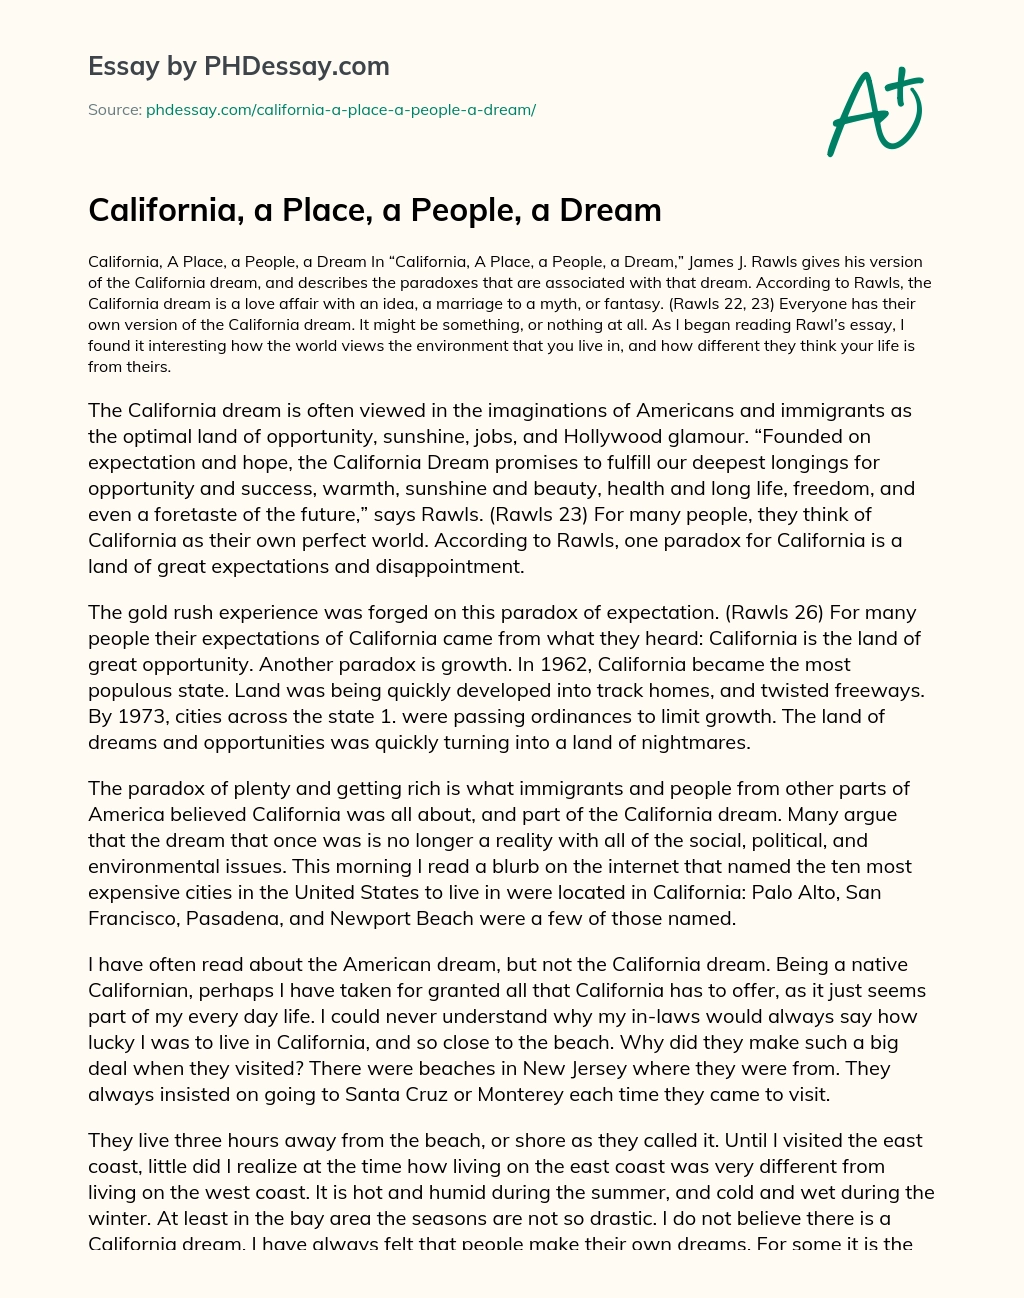 California, a Place, a People, a Dream essay